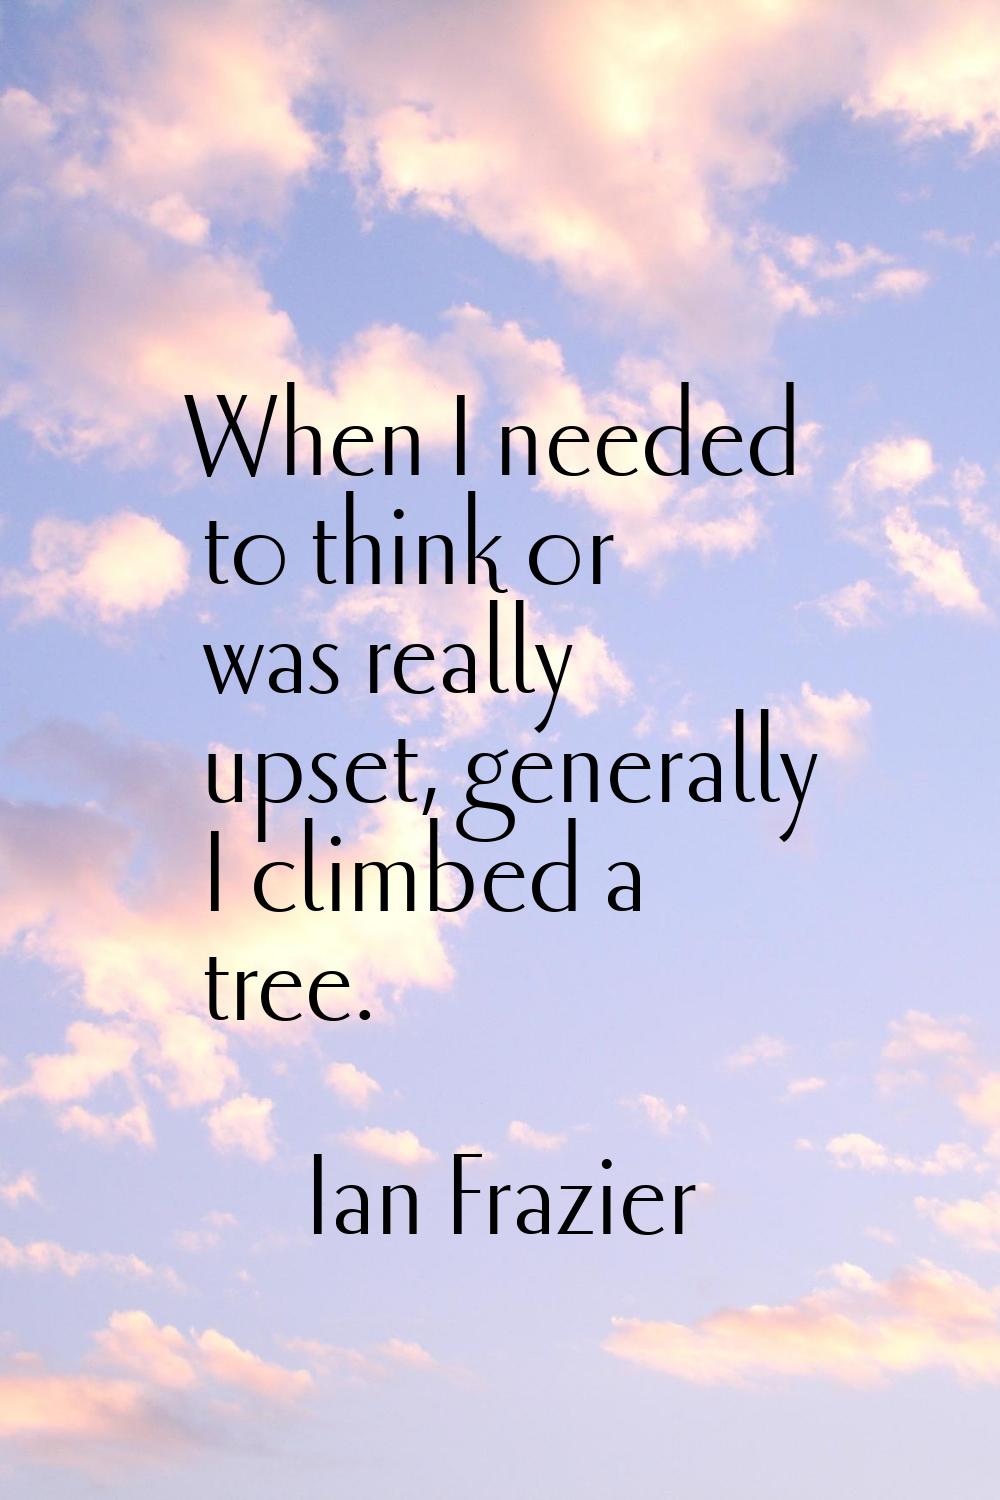 When I needed to think or was really upset, generally I climbed a tree.